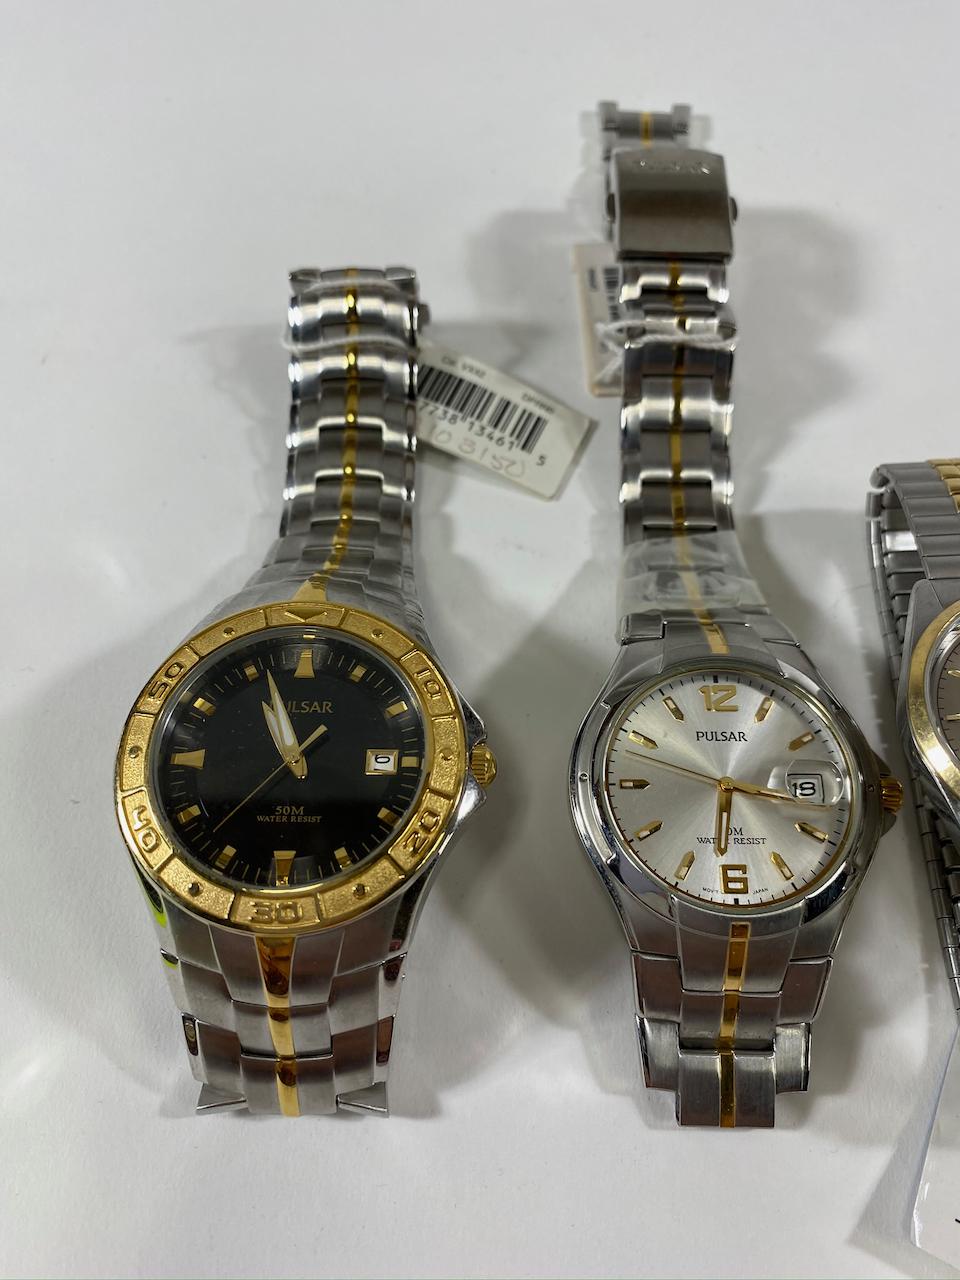 Pulsar Watches, one band broken. Estimated Retail Value of $700.00